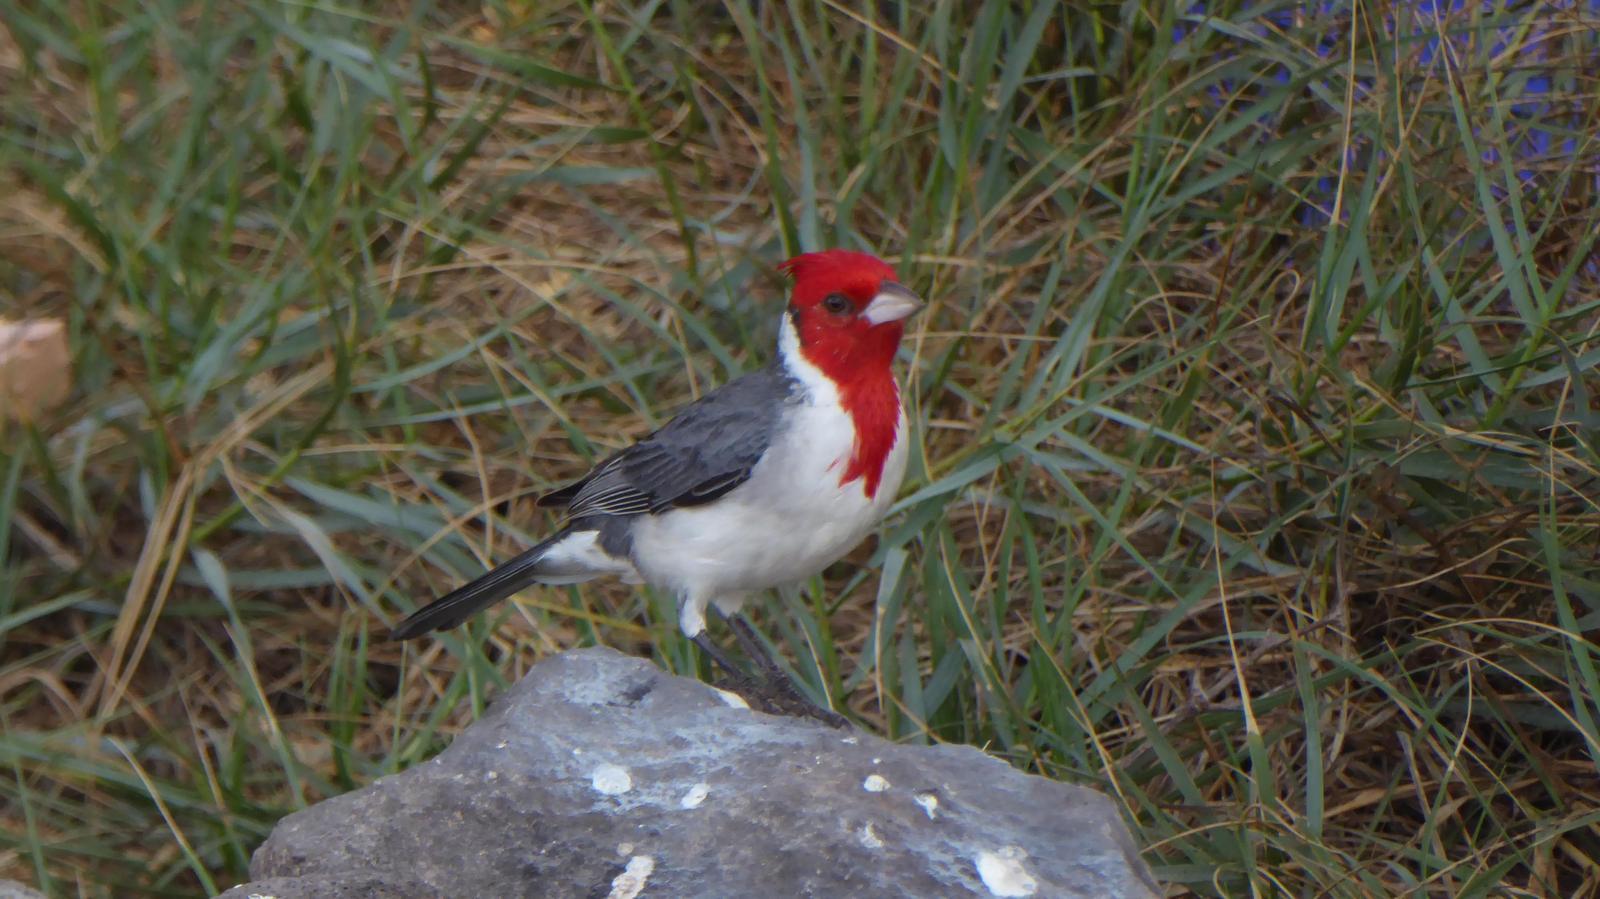 Red-crested Cardinal Photo by Daliel Leite